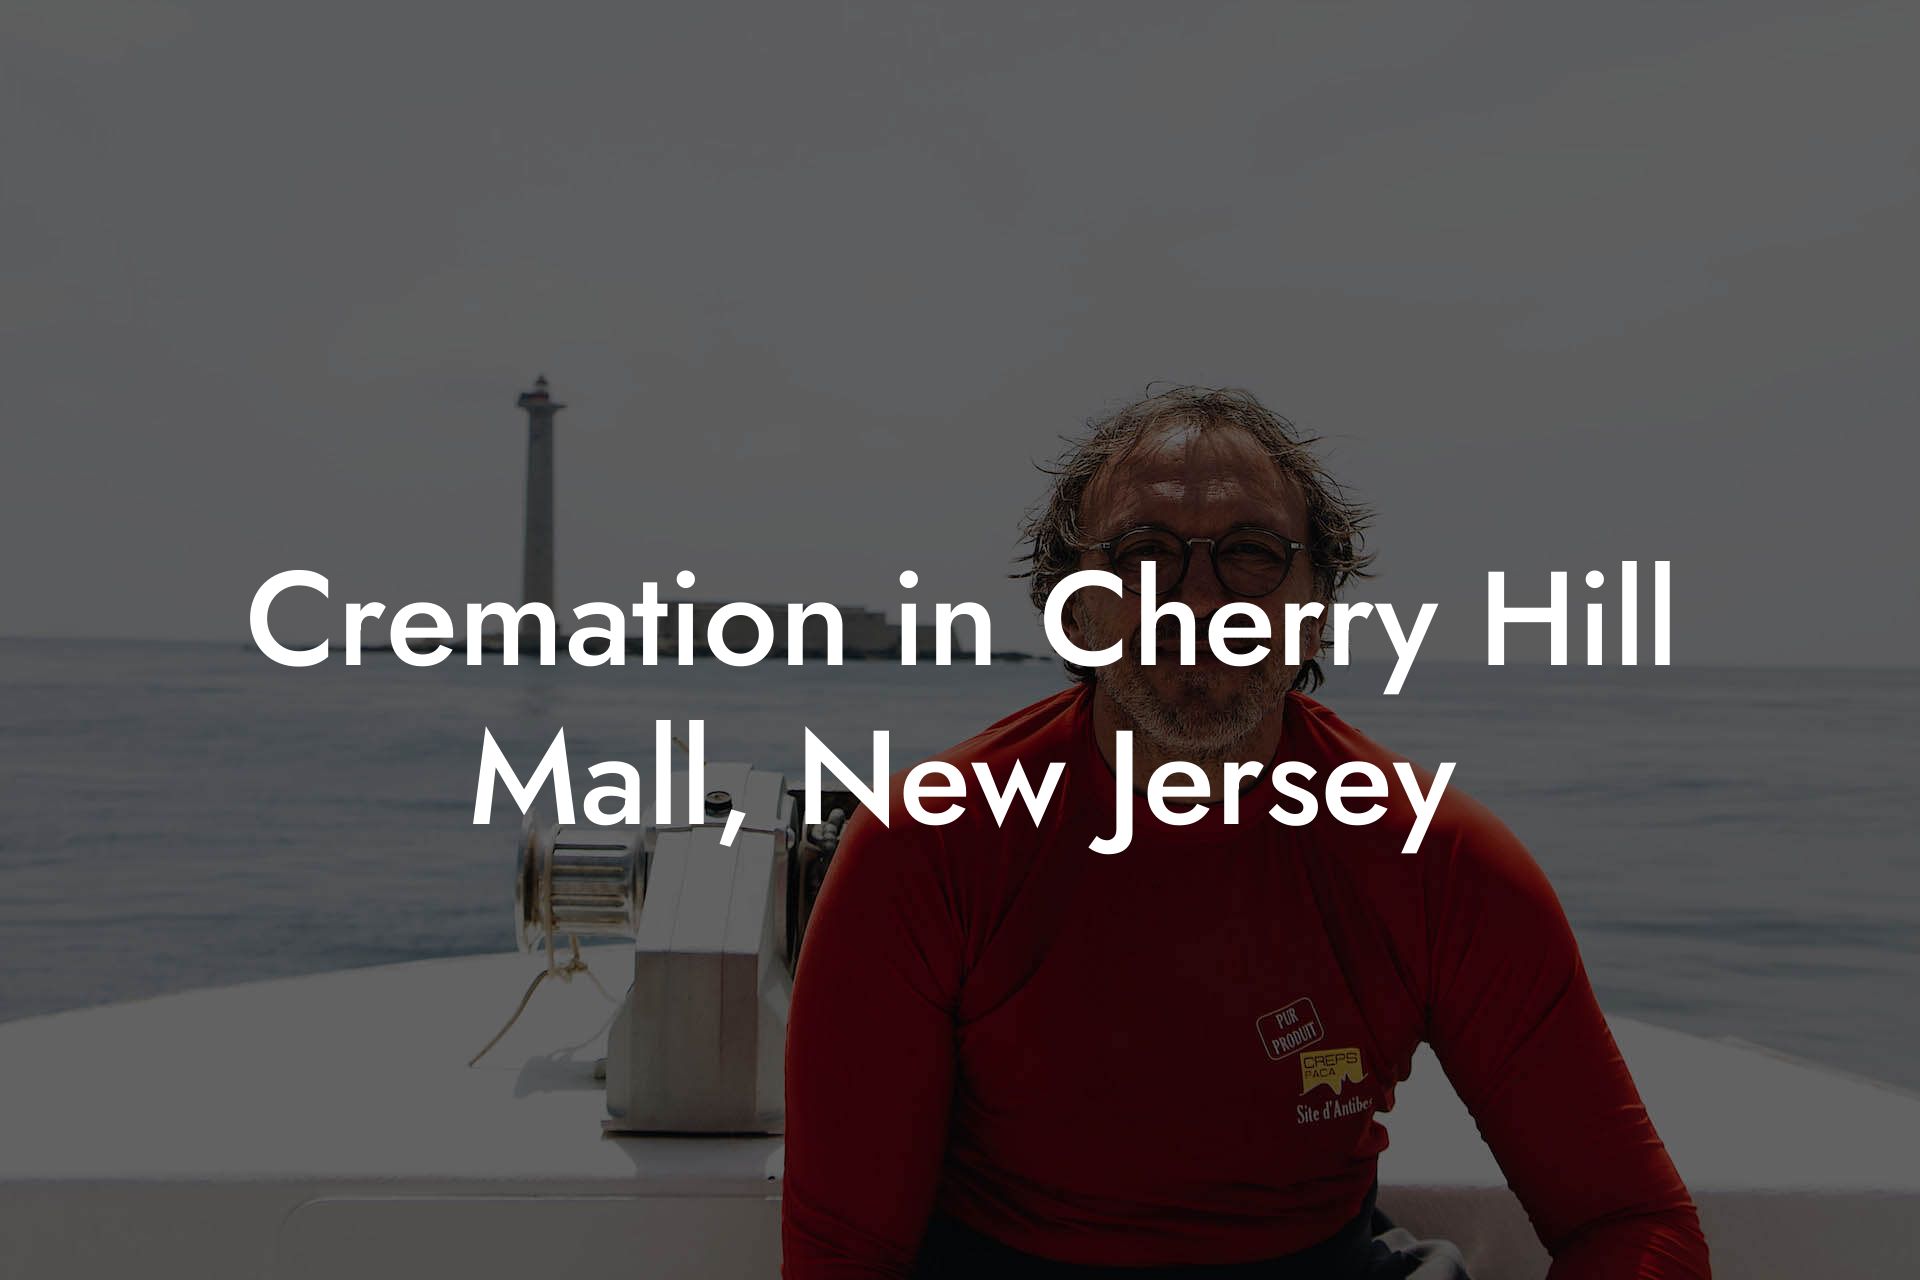 Cremation in Cherry Hill Mall, New Jersey